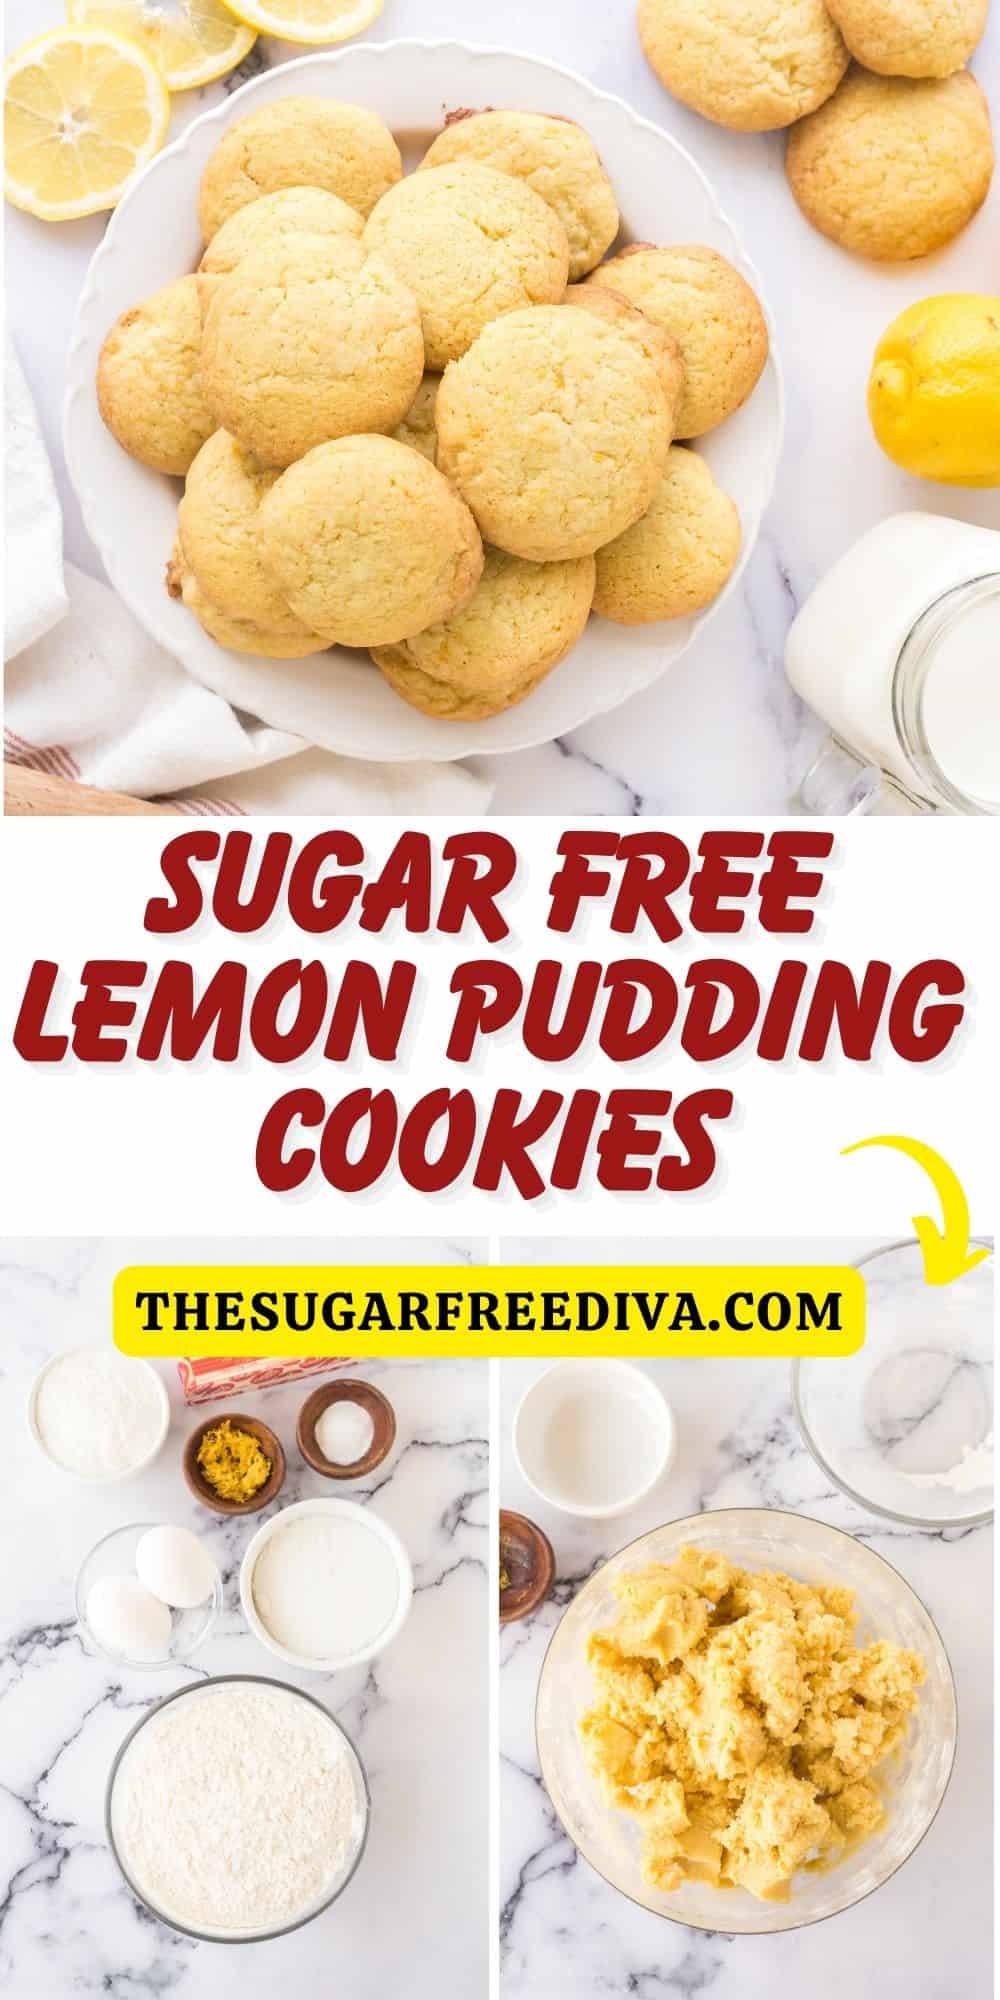 Sugar Free Lemon Pudding Cookies, a delicious soft and chewy lemony dessert or snack recipe made with no added sugar.